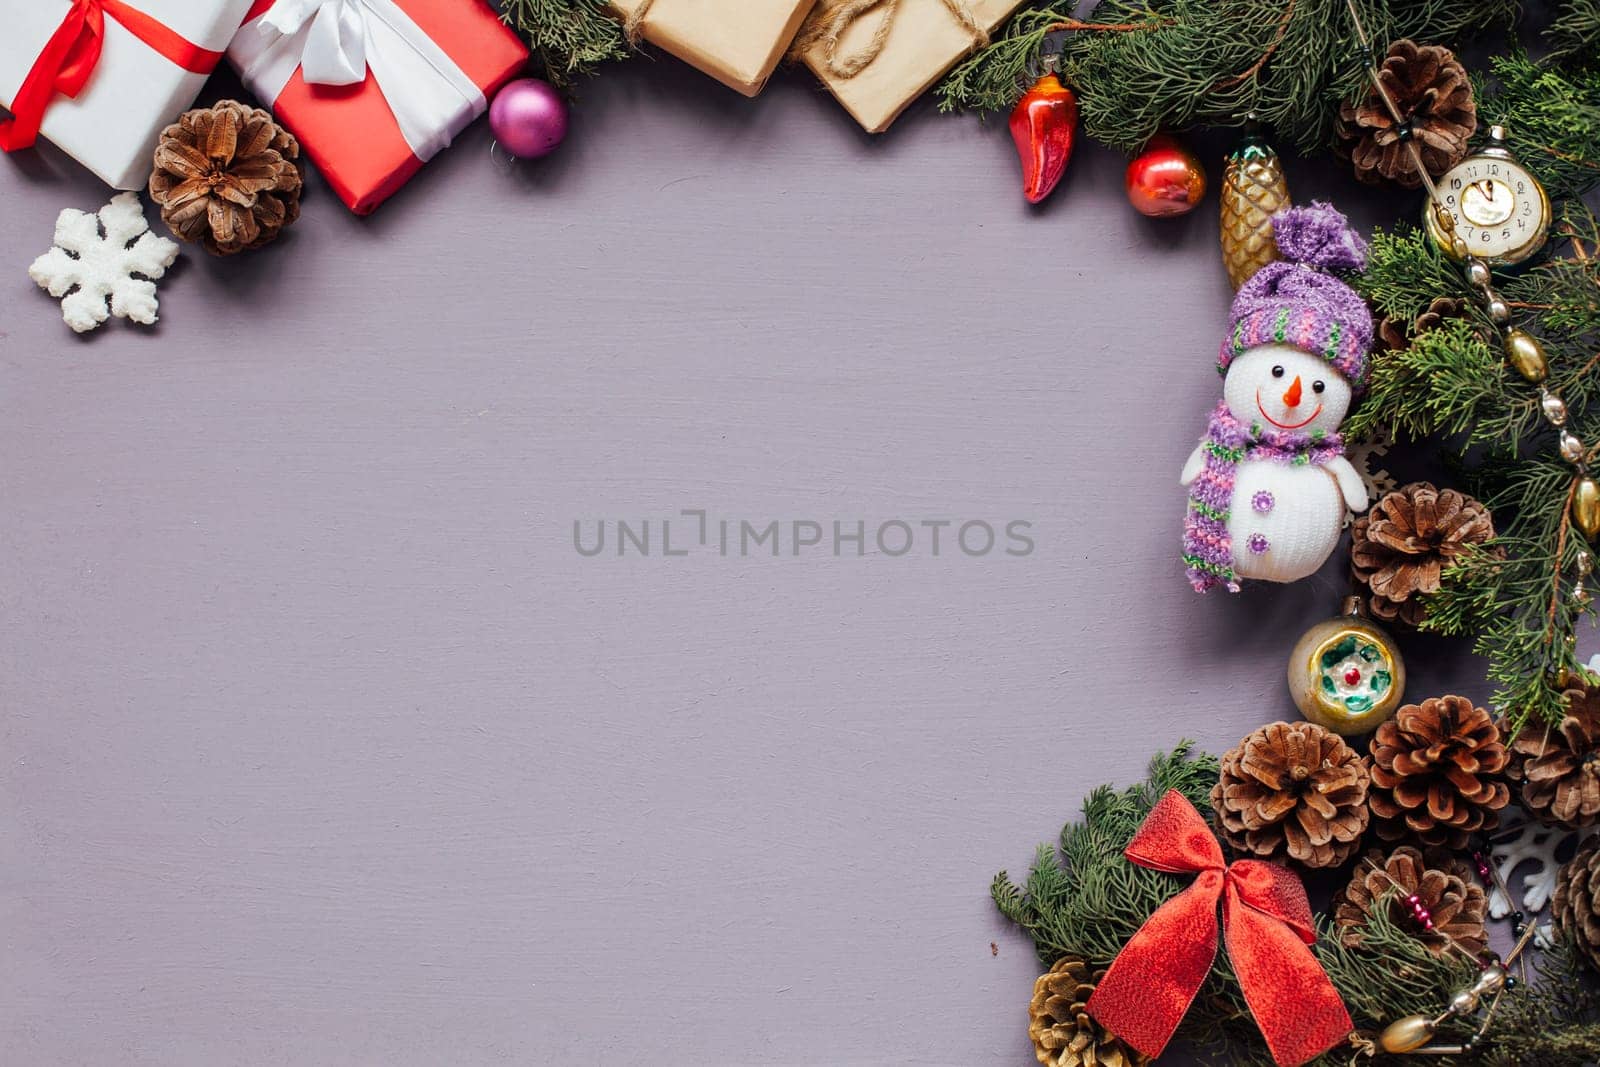 Christmas toys festive gifts decor new year on a purple background by Simakov